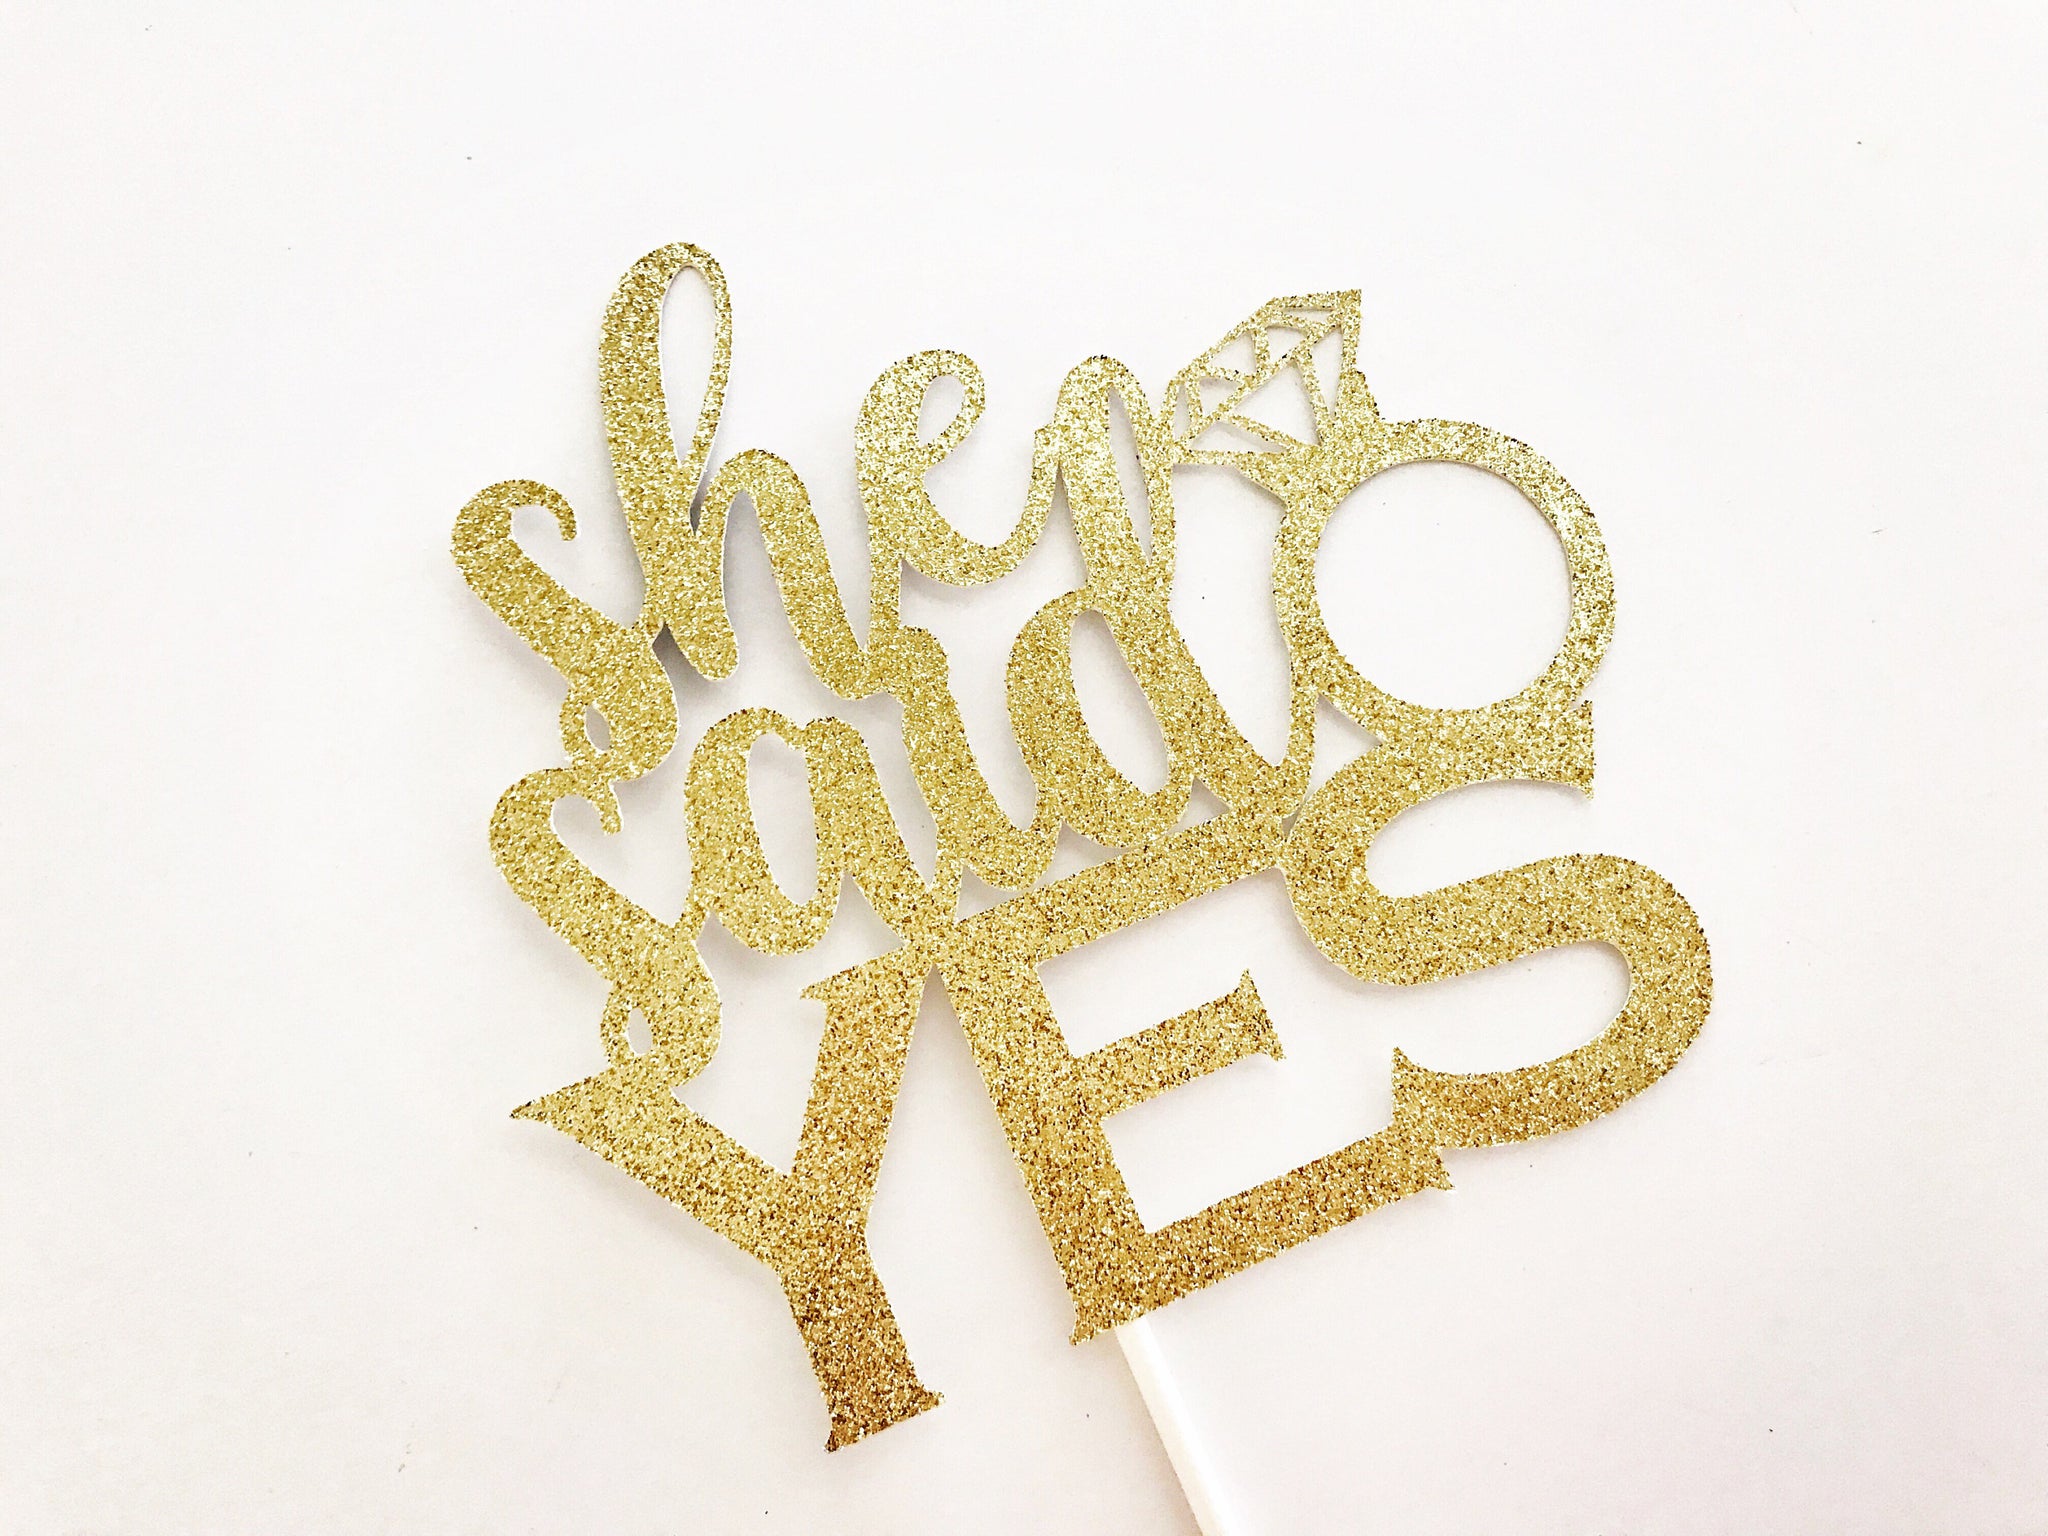 She Said Yes Cake Topper, Engagement Party Cake Topper, Bridal Shower Cake Topper